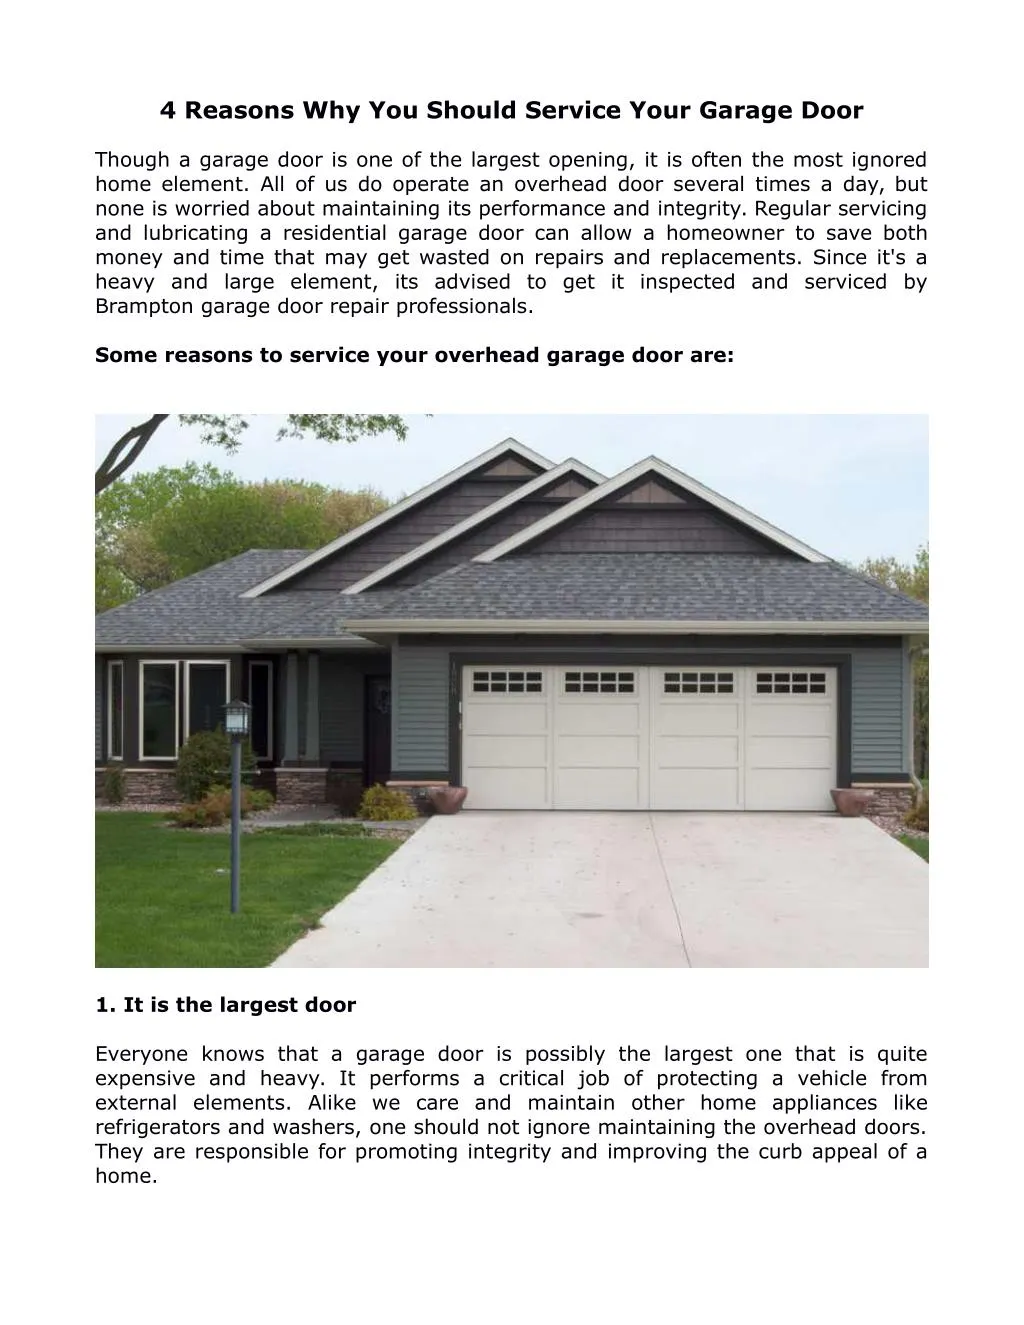 4 reasons why you should service your garage door